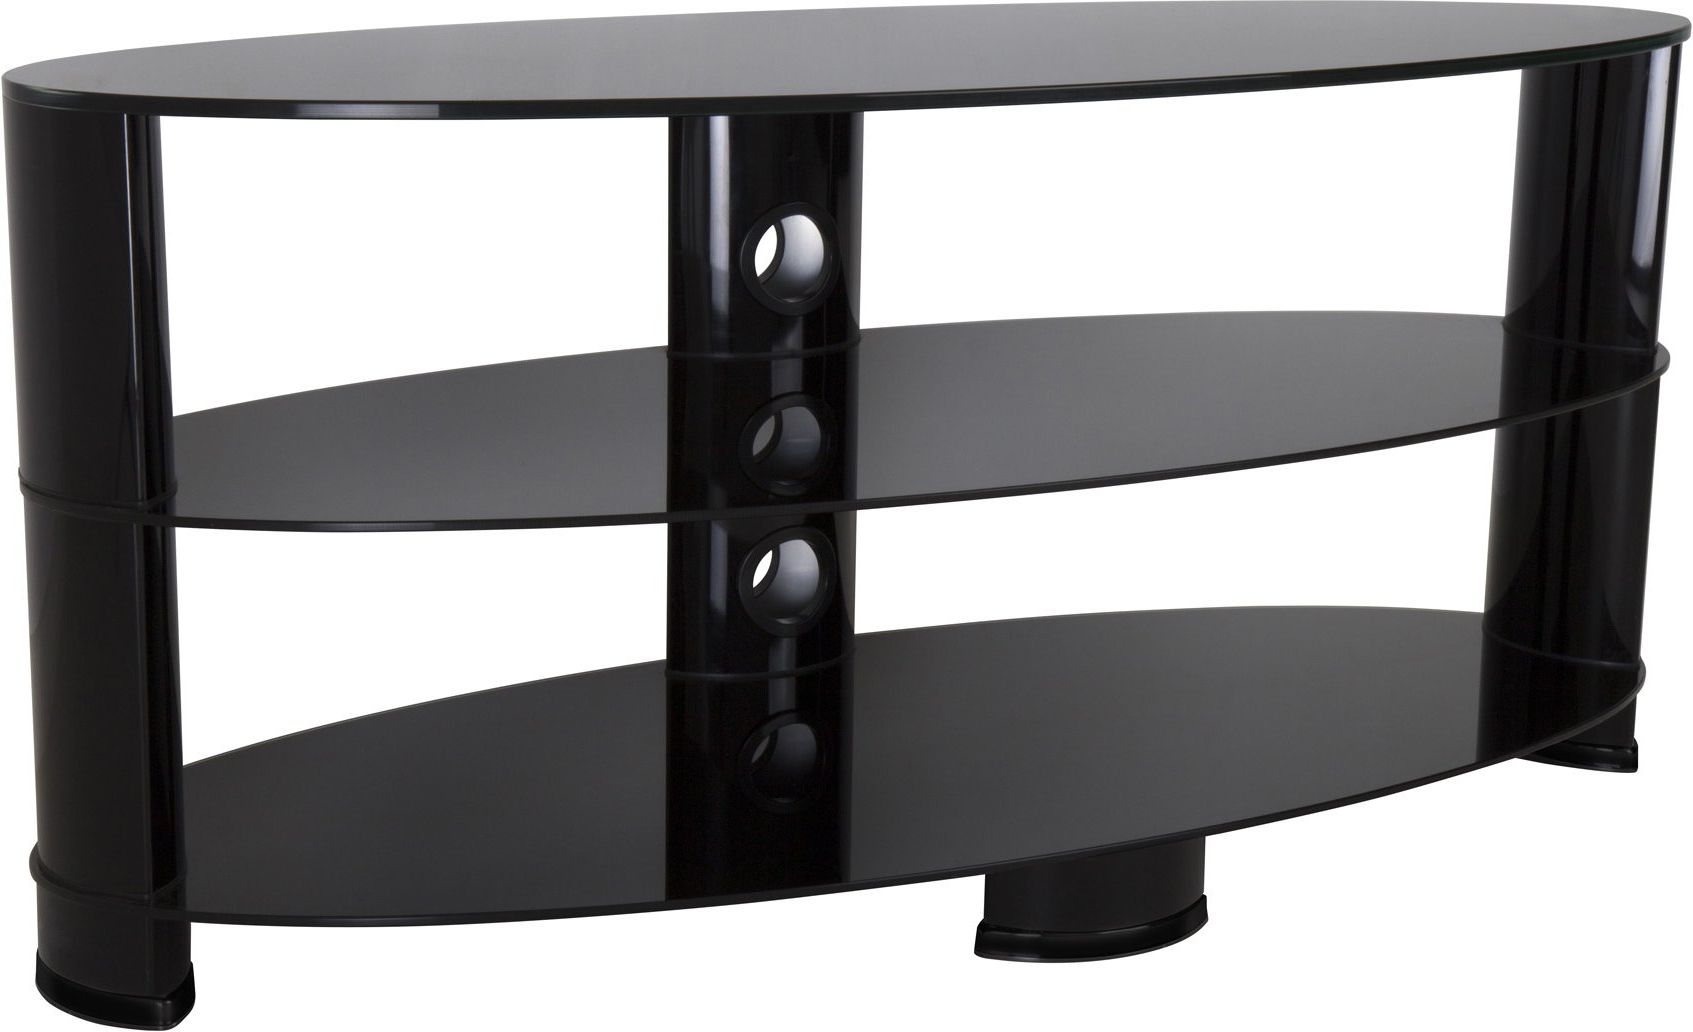 Glass Shelves Tv Stands For Tvs Up To 60" With Regard To Preferred Avf Ovl1200bb Oval Glass Tv Stand For Tvs Up To 55 Inch (Photo 4 of 10)